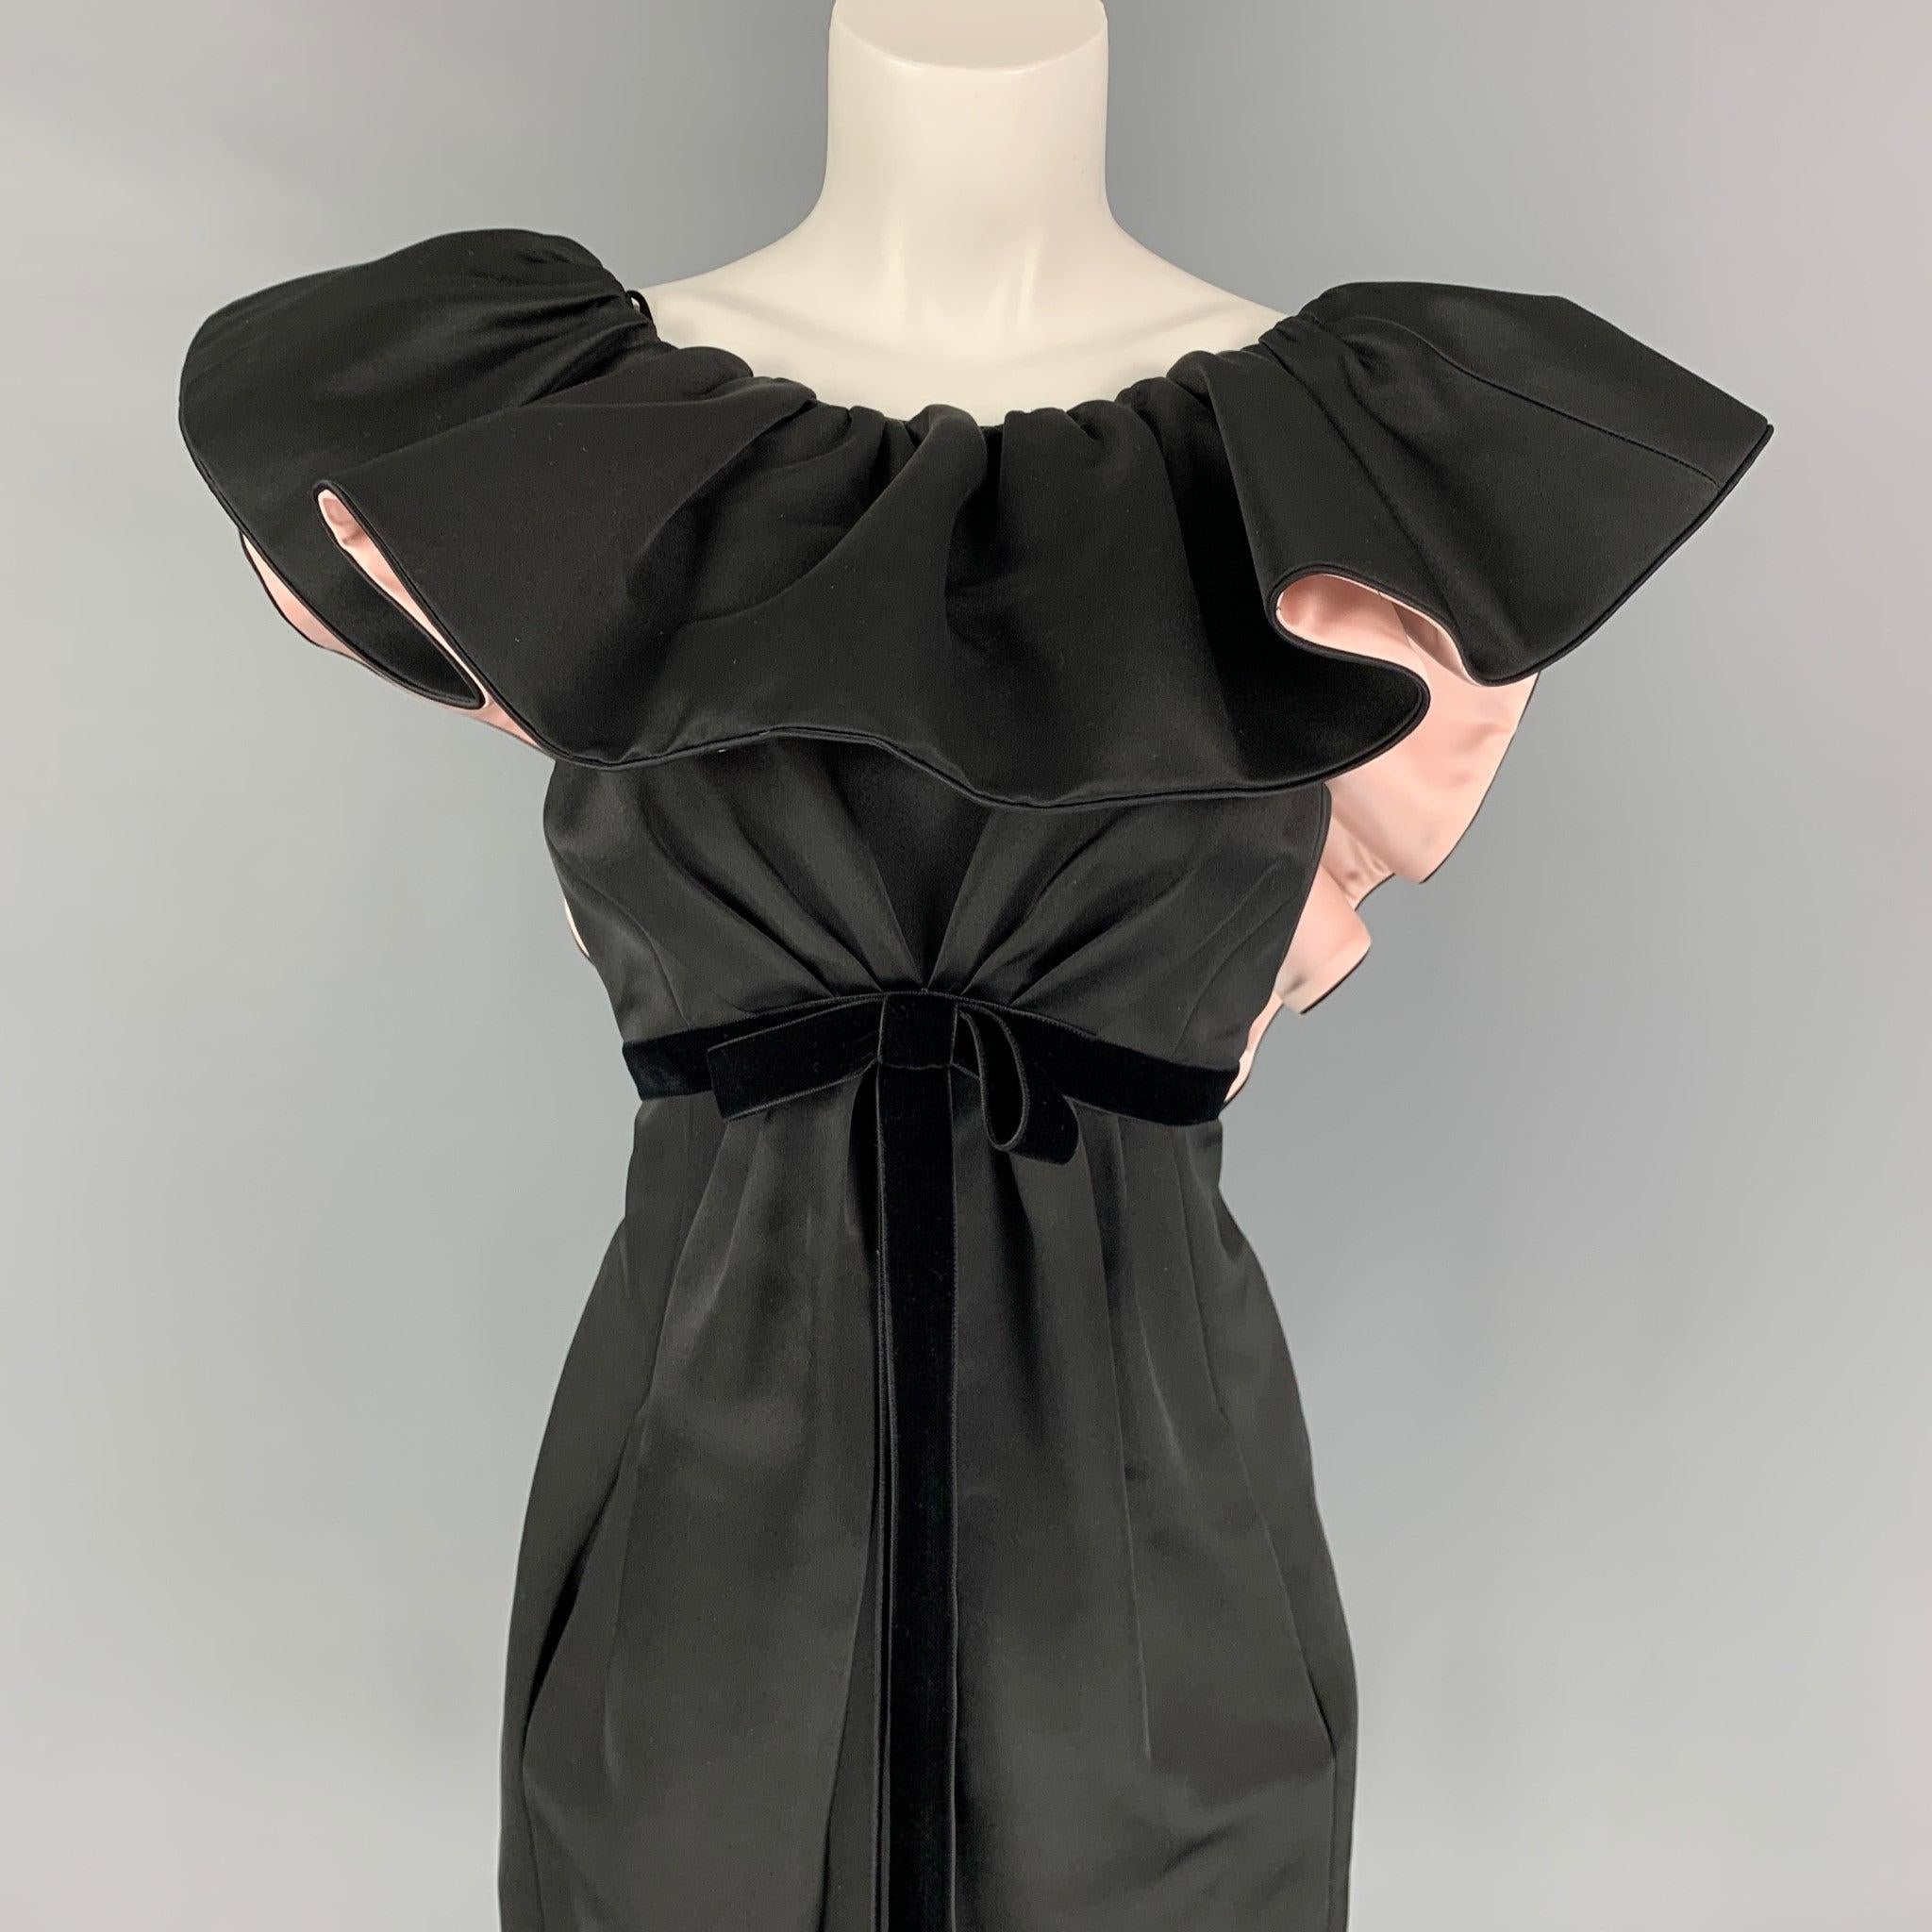 MARC JACOBS 'RUNWAY' cocktail dress comes in a black silk featuring a ruffle neckline design, open back, shift style, velvet tie belt at empire waist, slit pockets, and a back zip up closure. Made in USA,Excellent
Pre-Owned Condition. 

Marked:   6